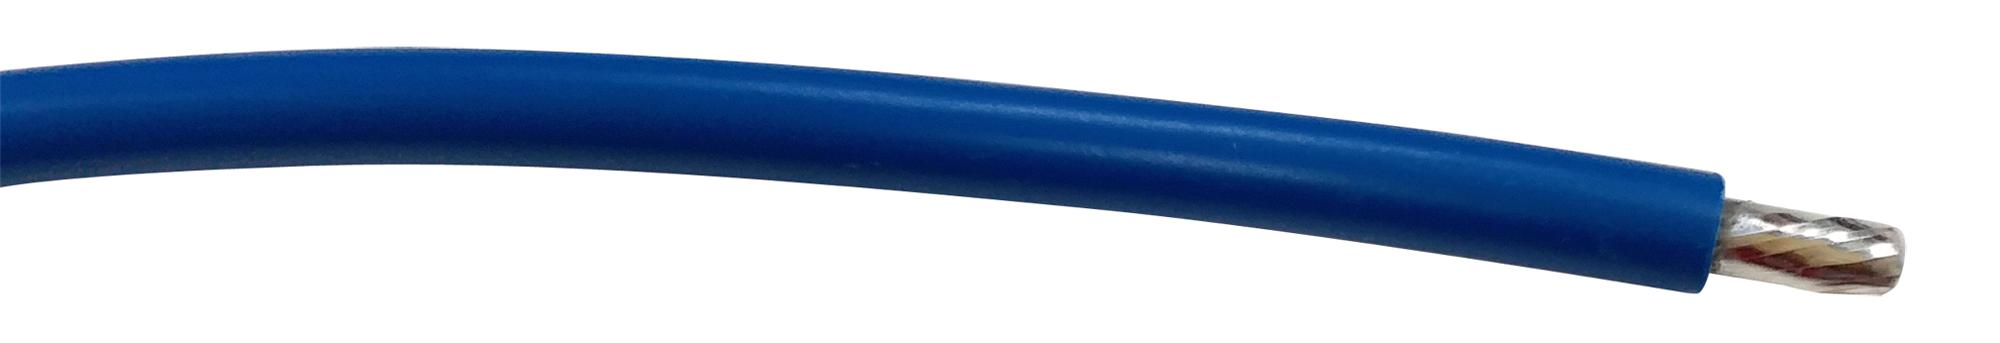 PP002560 CABLE WIRE, 24AWG, BLUE, 305M PRO POWER